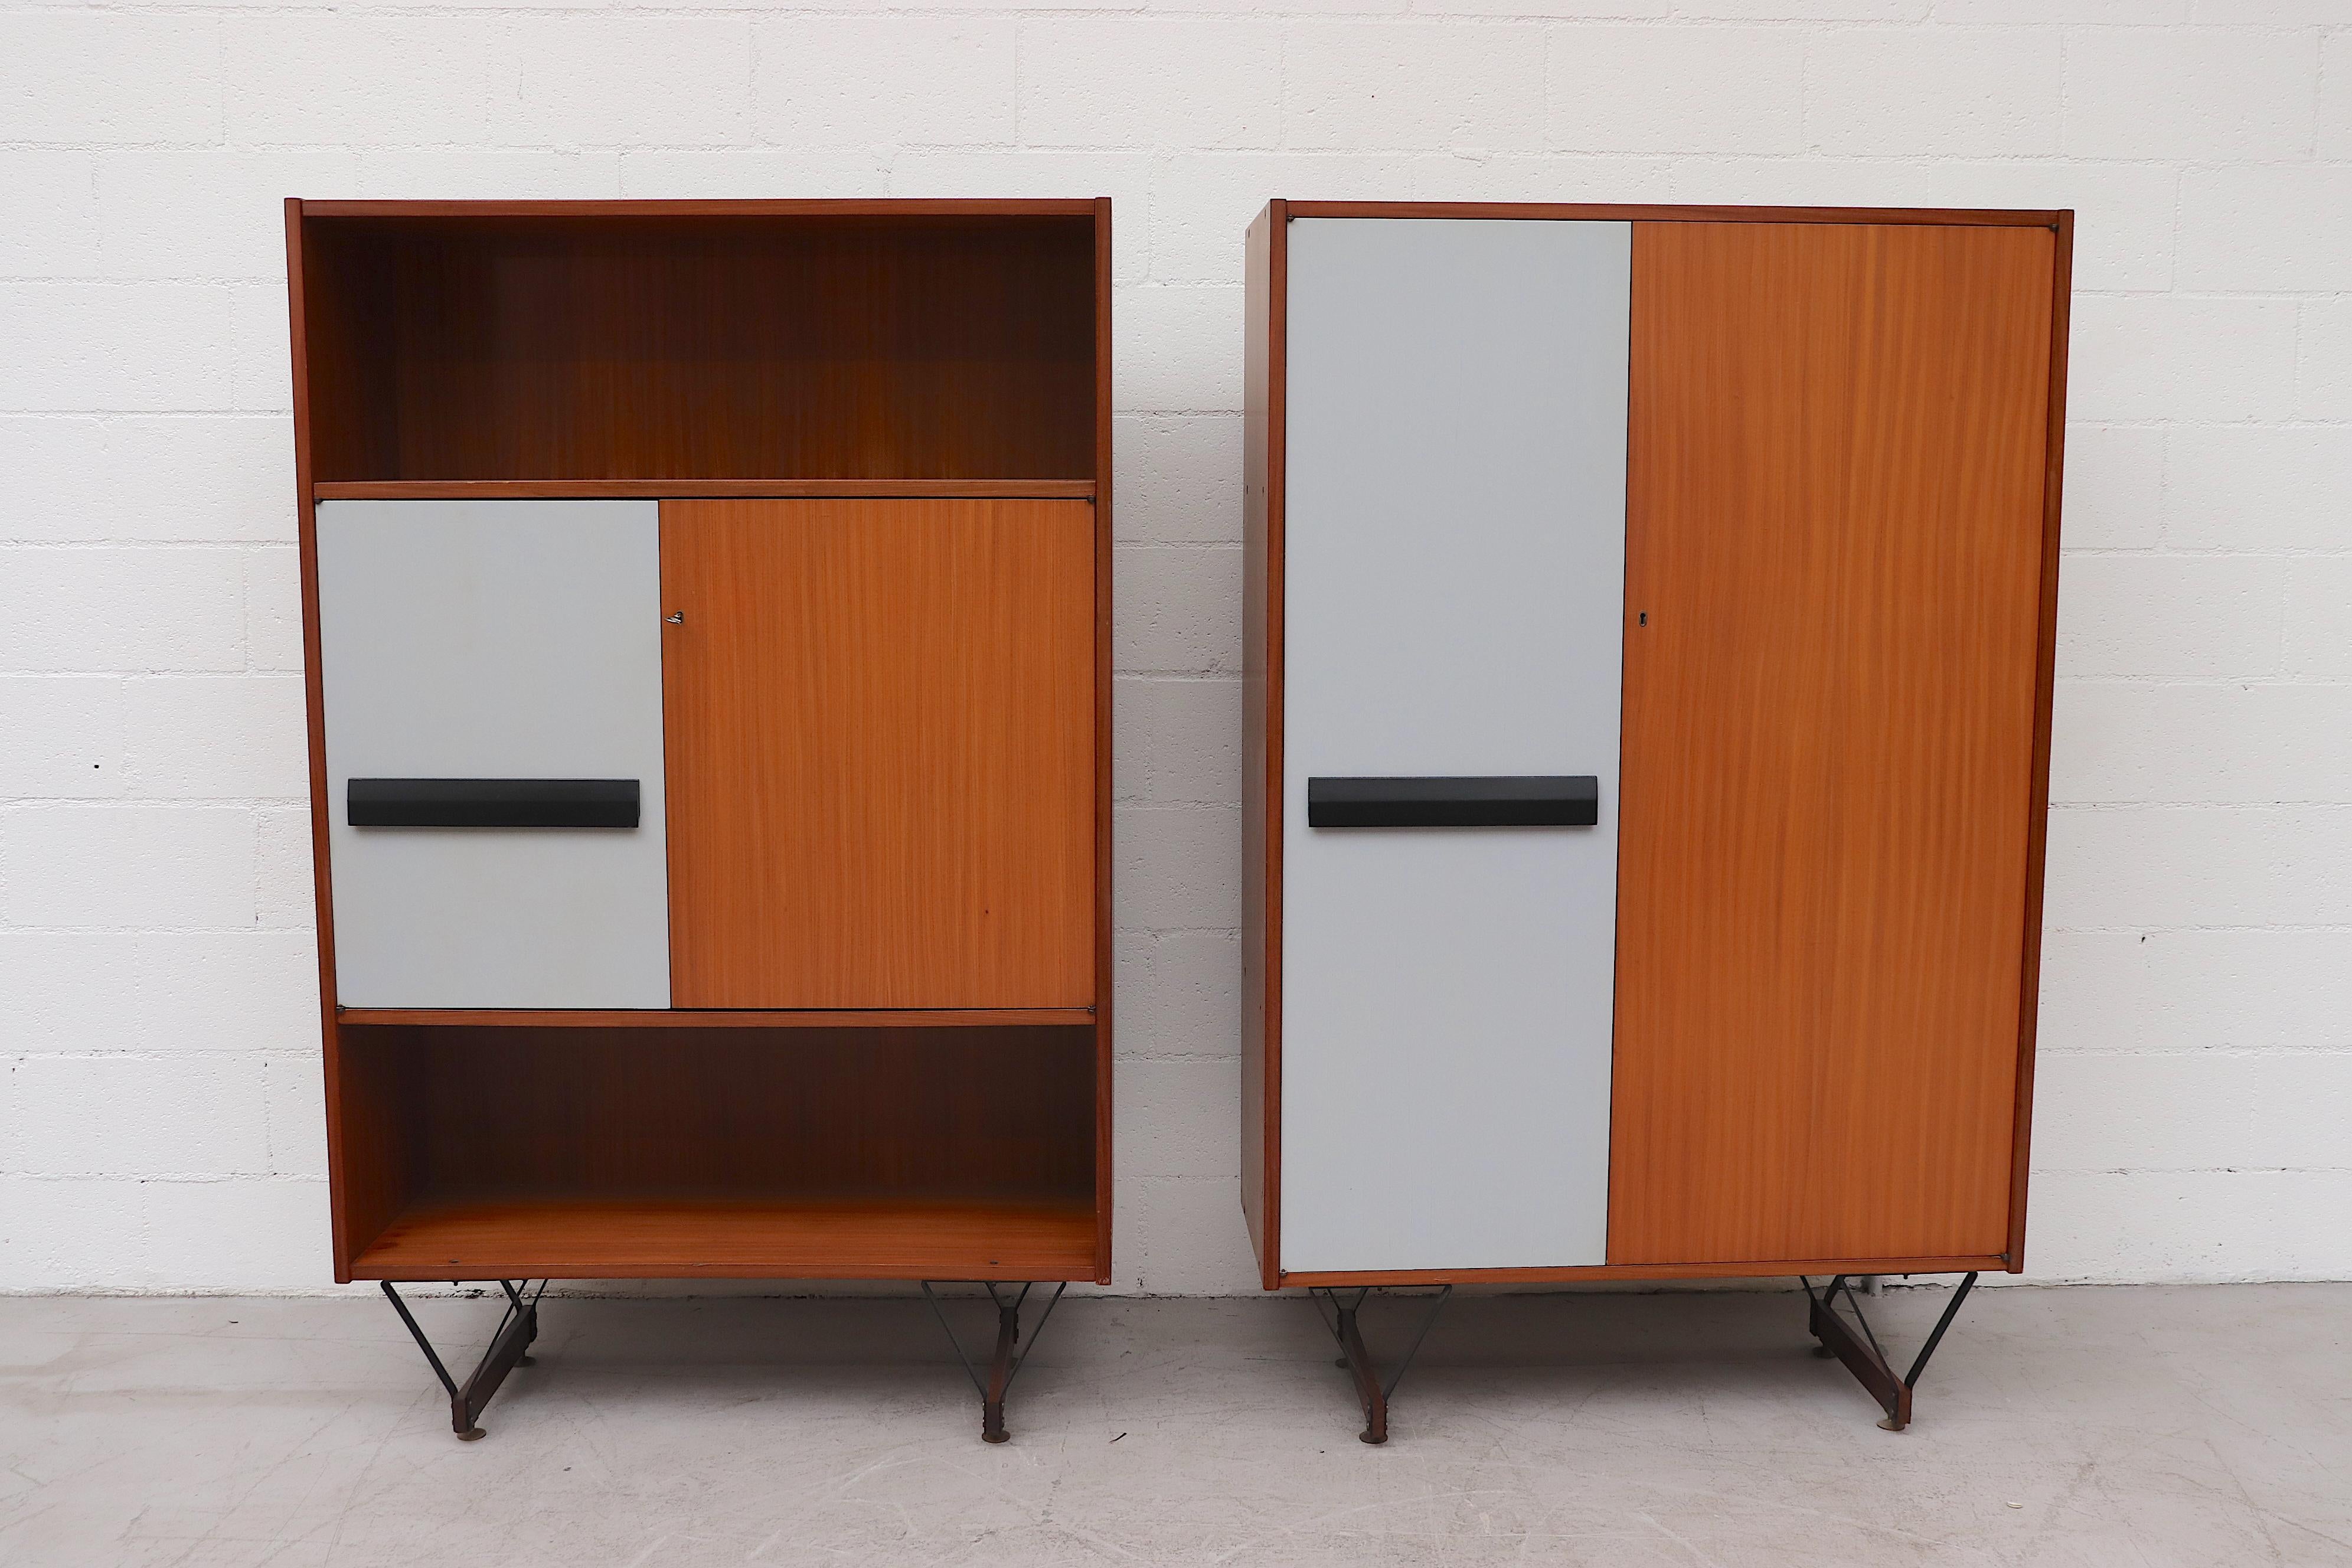 Stunning Gio Ponti inspired midcentury Italian wardrobe cabinet in teak with painted grey door and open shelving, black door pull and built-in storage shelves. The cabinet stands on architectural black enameled metal hairpin-like legs. Lightly